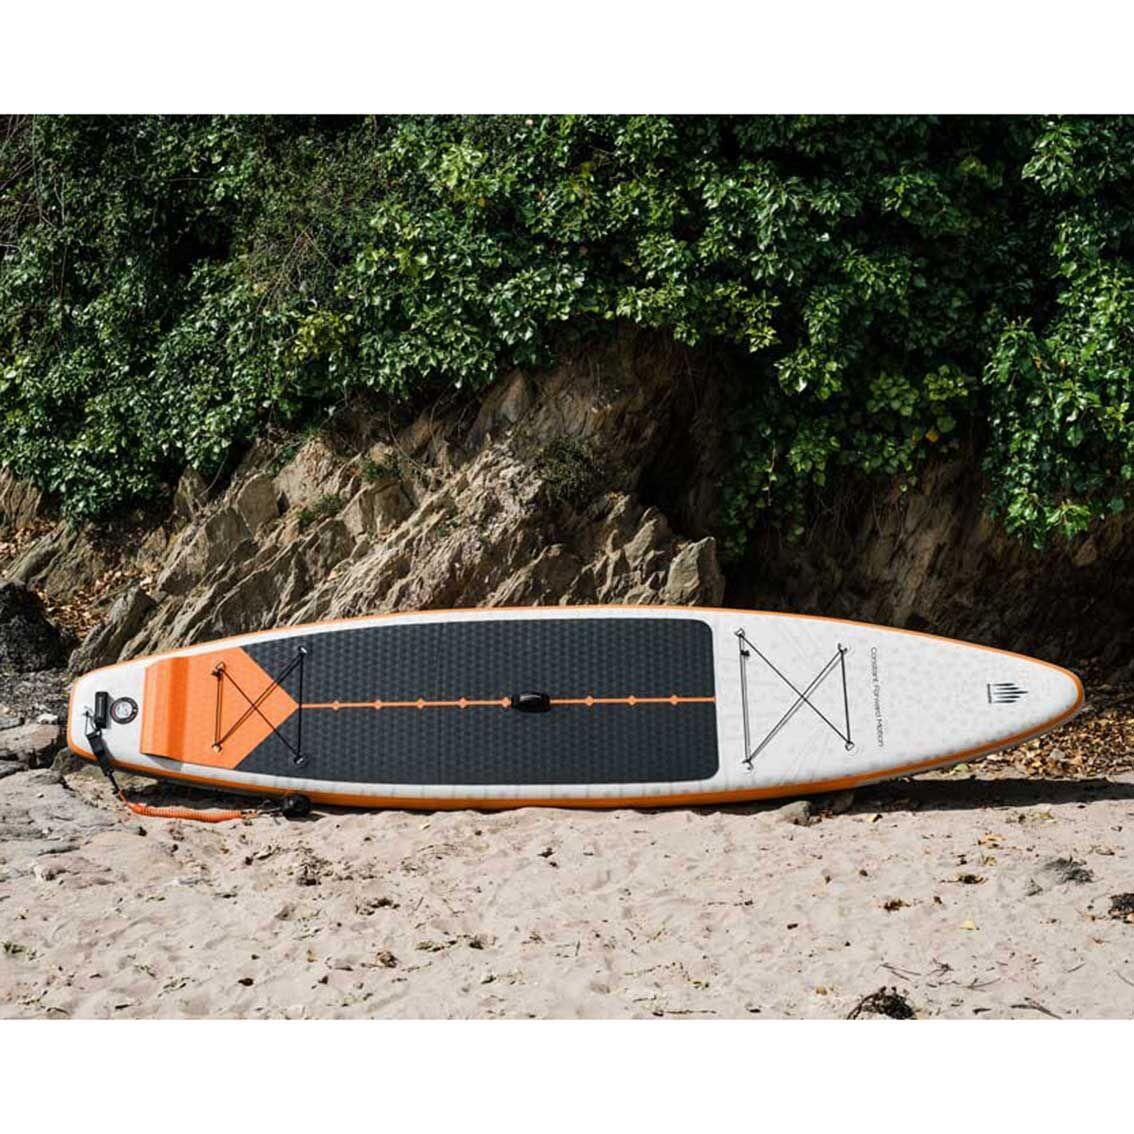 SHARK TOURING 12'6 x 34" x 6" FOR TALLER AND HEAVIER PADDLEBOARDERS 3/6